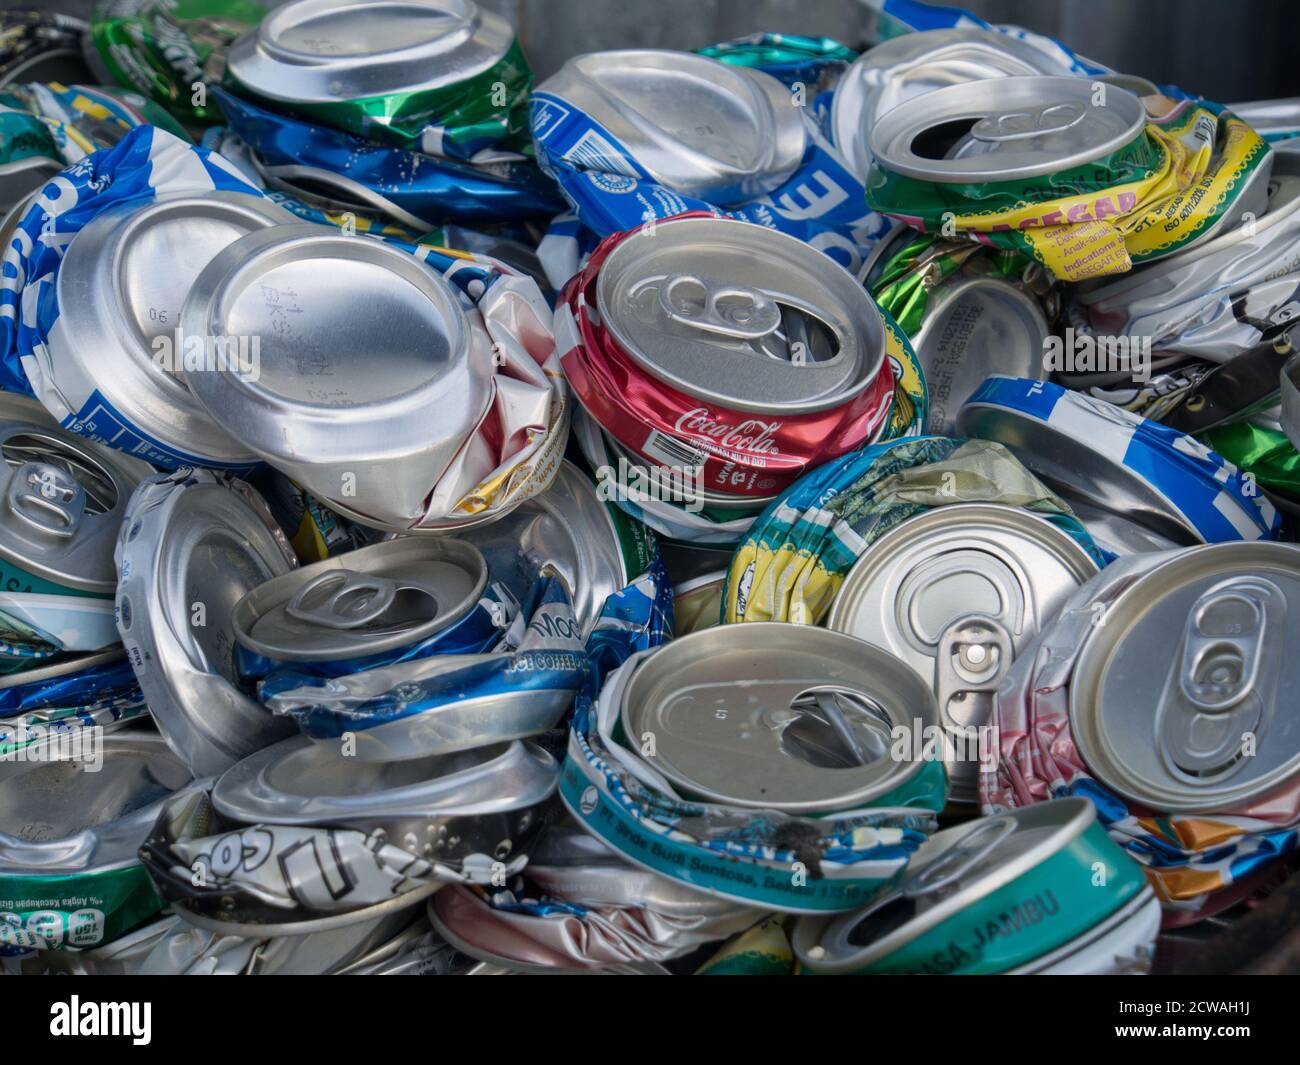 Dekai, Indonesia - January 21, 2015: squeezed aluminium cans in large containers Stock Photo